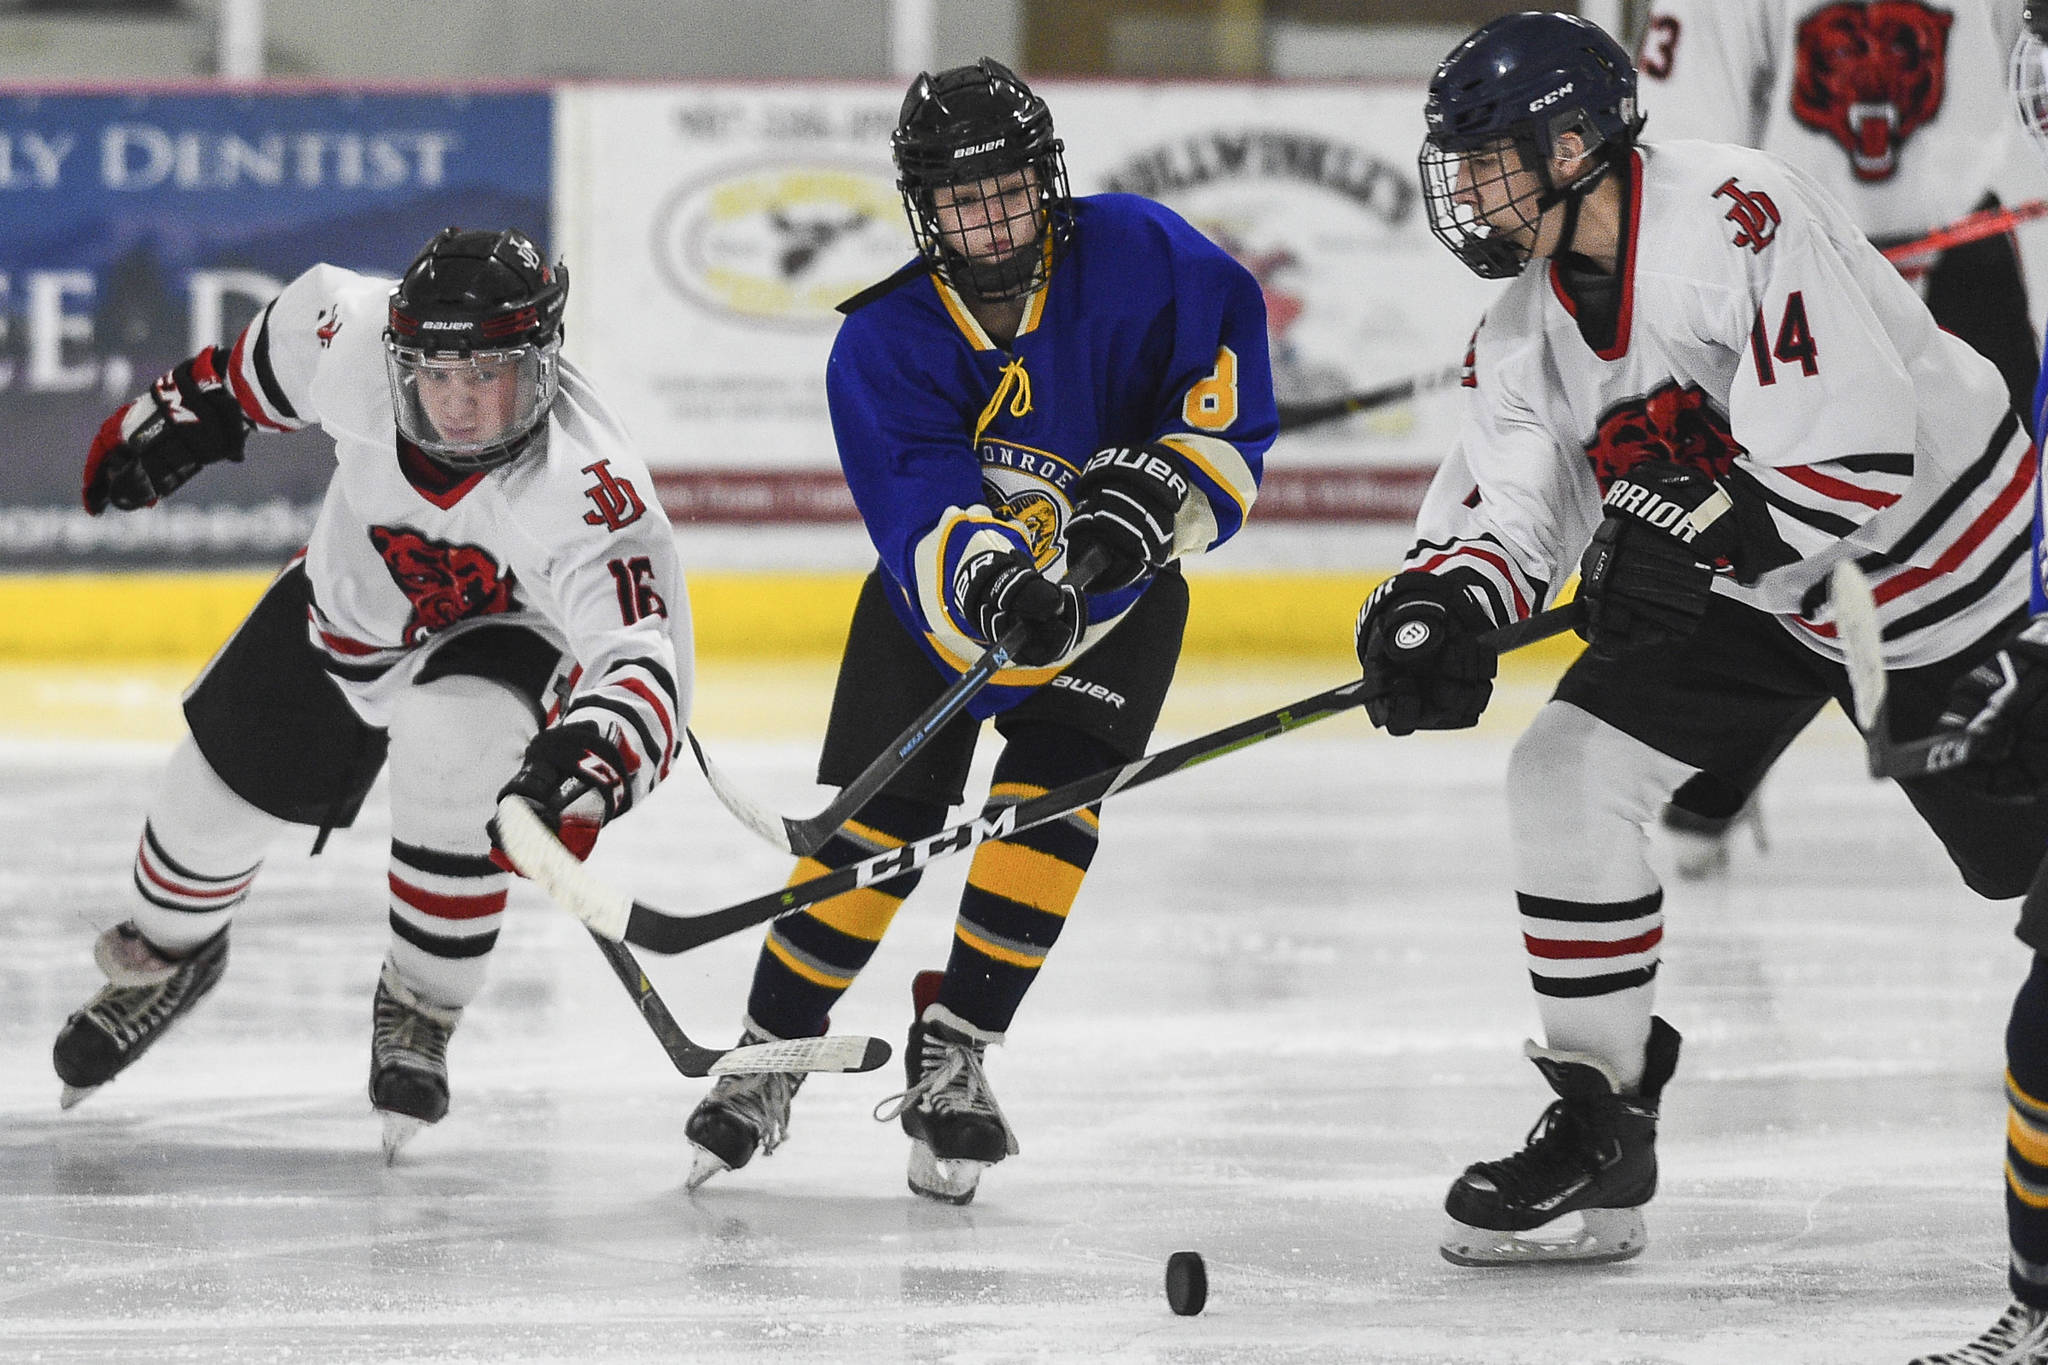 Juneau-Douglas’ Zac Stagg, left, and Max McHenry, right, take the puck away from Monroe Catholic’s Bella Knavel at the Treadwell Arena on Friday, Nov. 15, 2019. JDHS won 13-0. (Michael Penn | Juneau Empire)